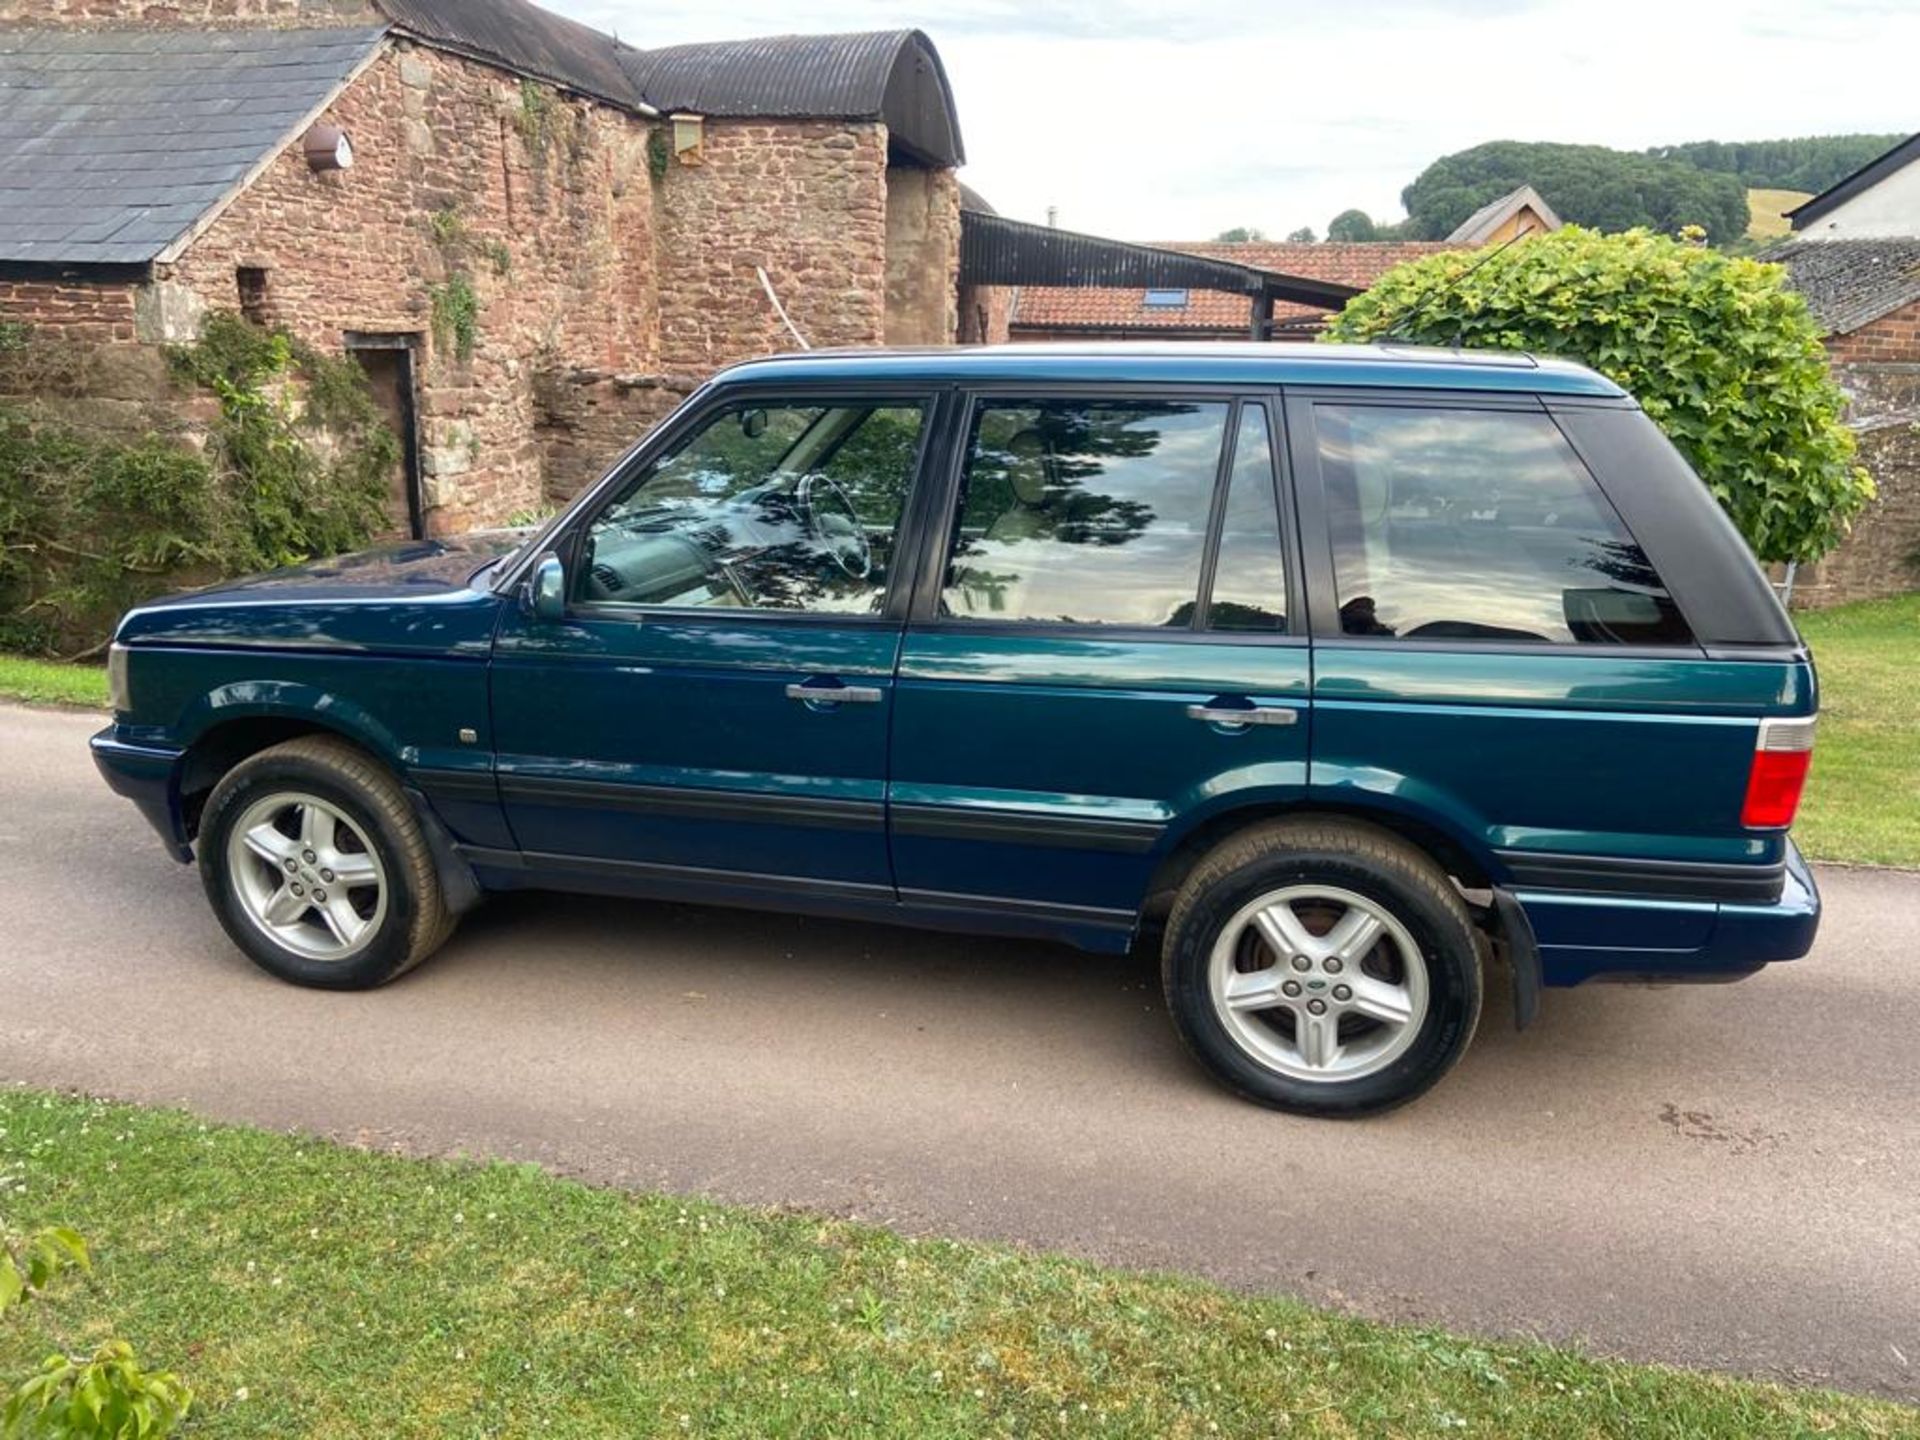 1998 Limited Edition Range Rover P38 - Image 4 of 39